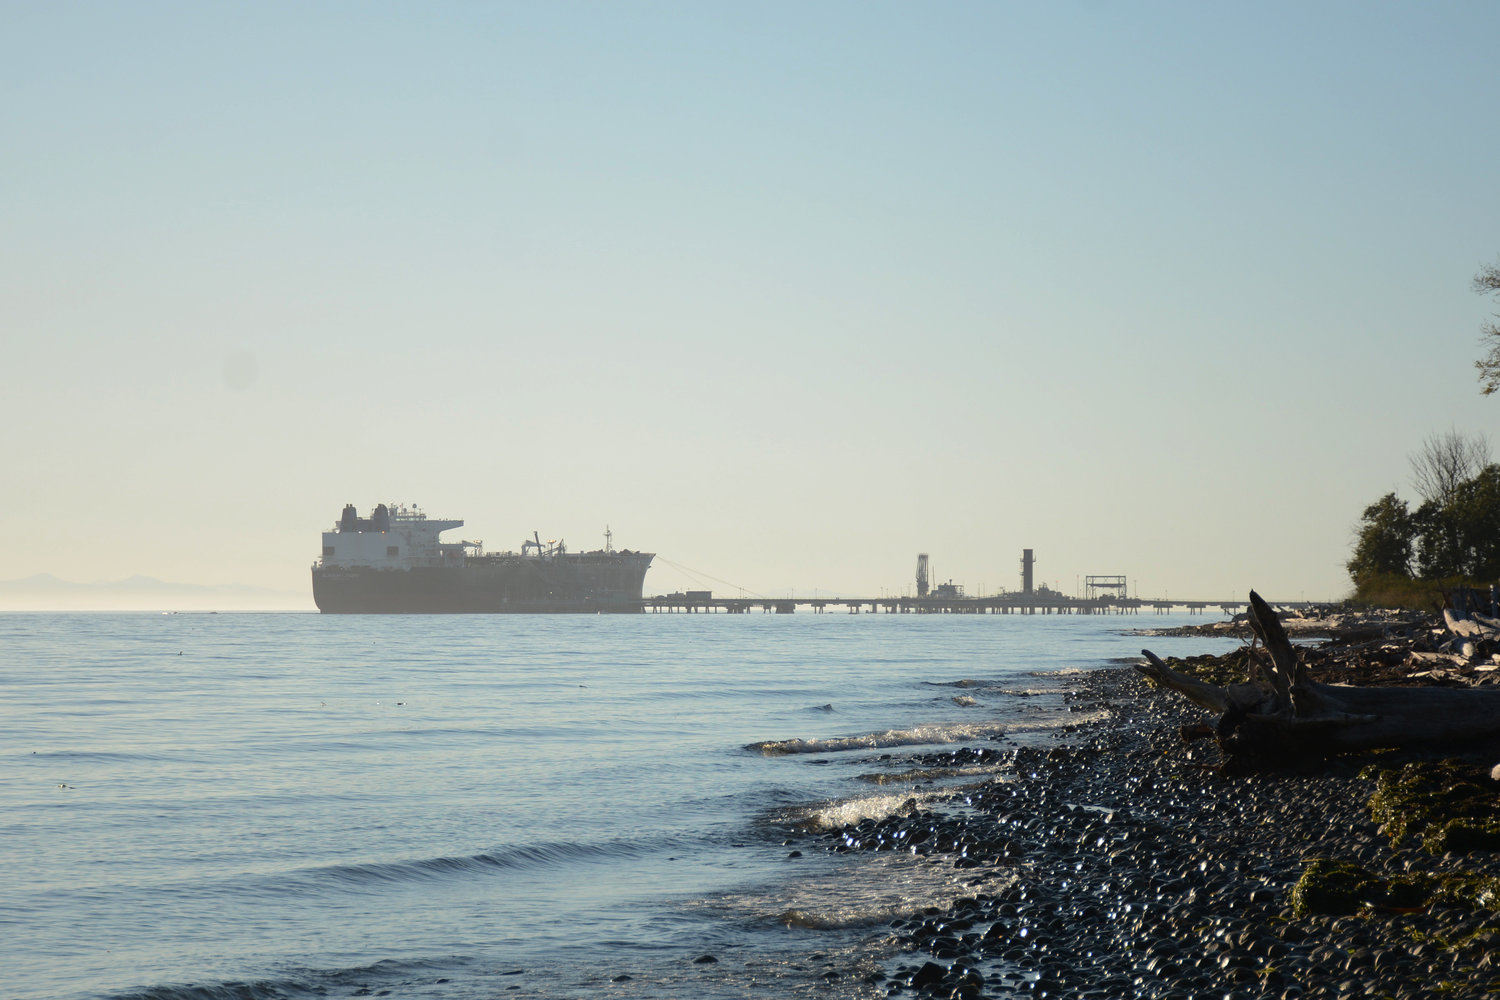 A vessel moored at the south wing of BP’s Cherry Point dock as seen from the beach along Gulf Road on September 20, 2022.